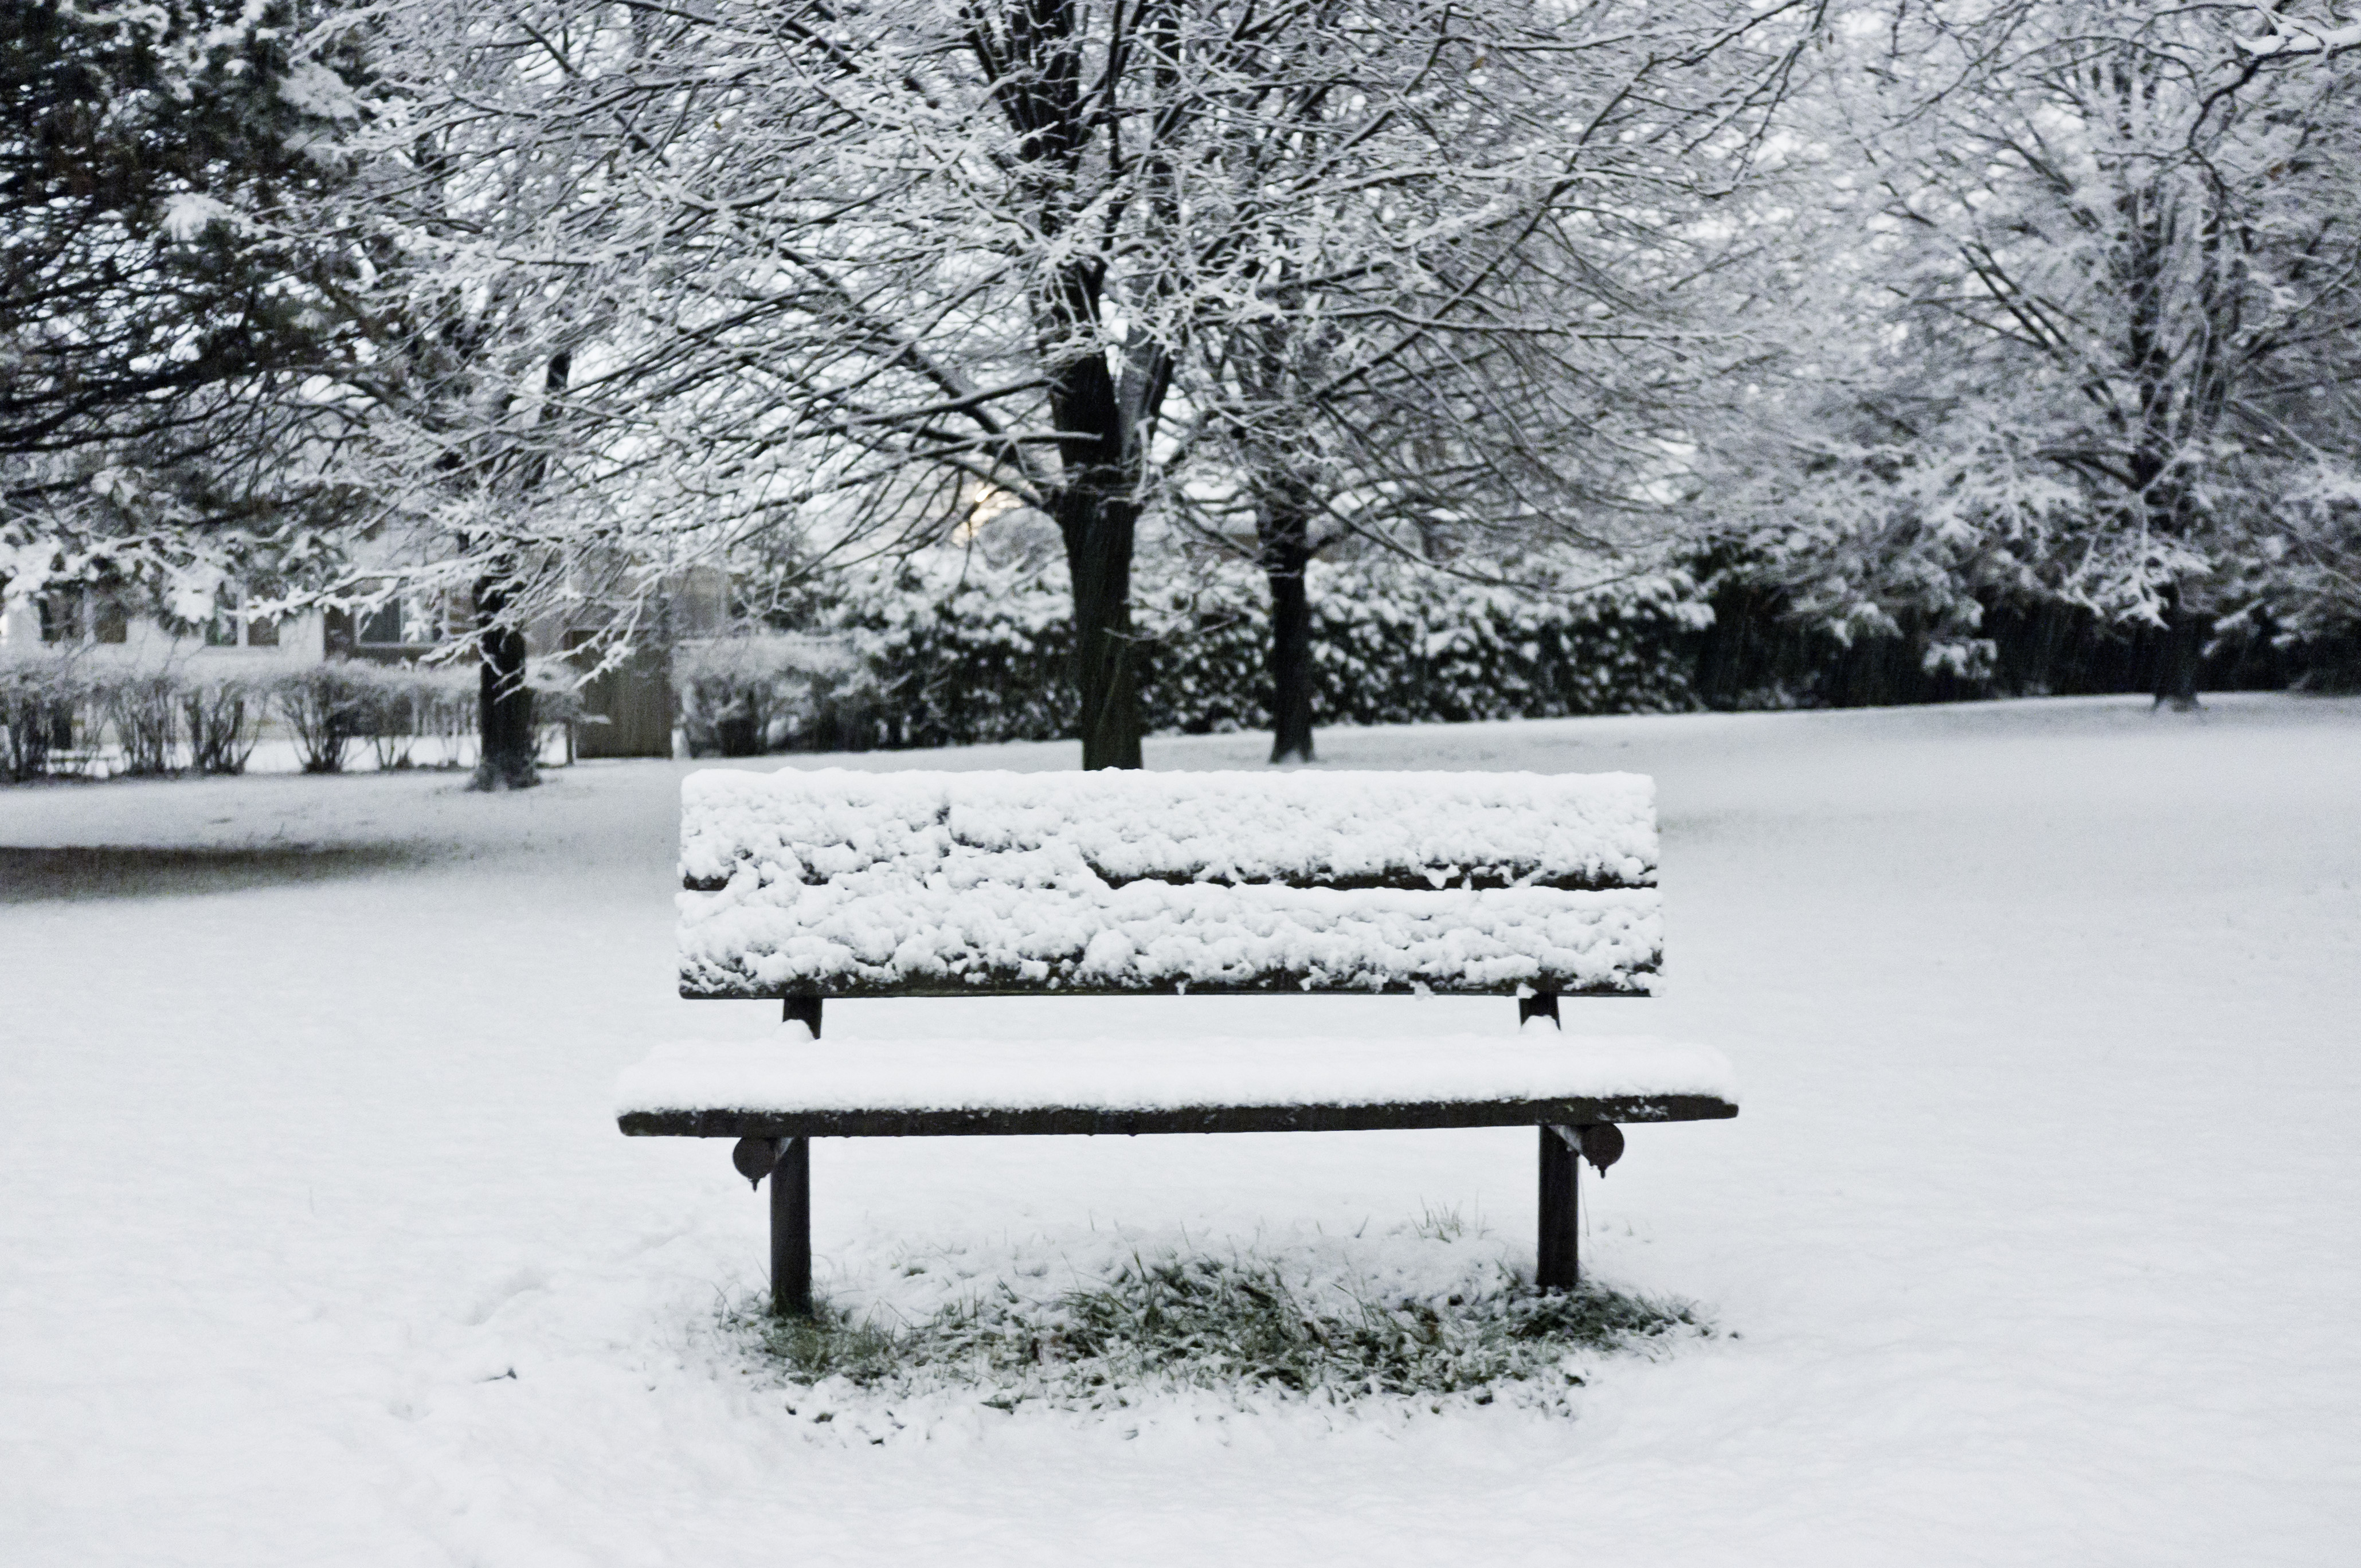 File:Cold bench.jpg - Wikimedia Commons